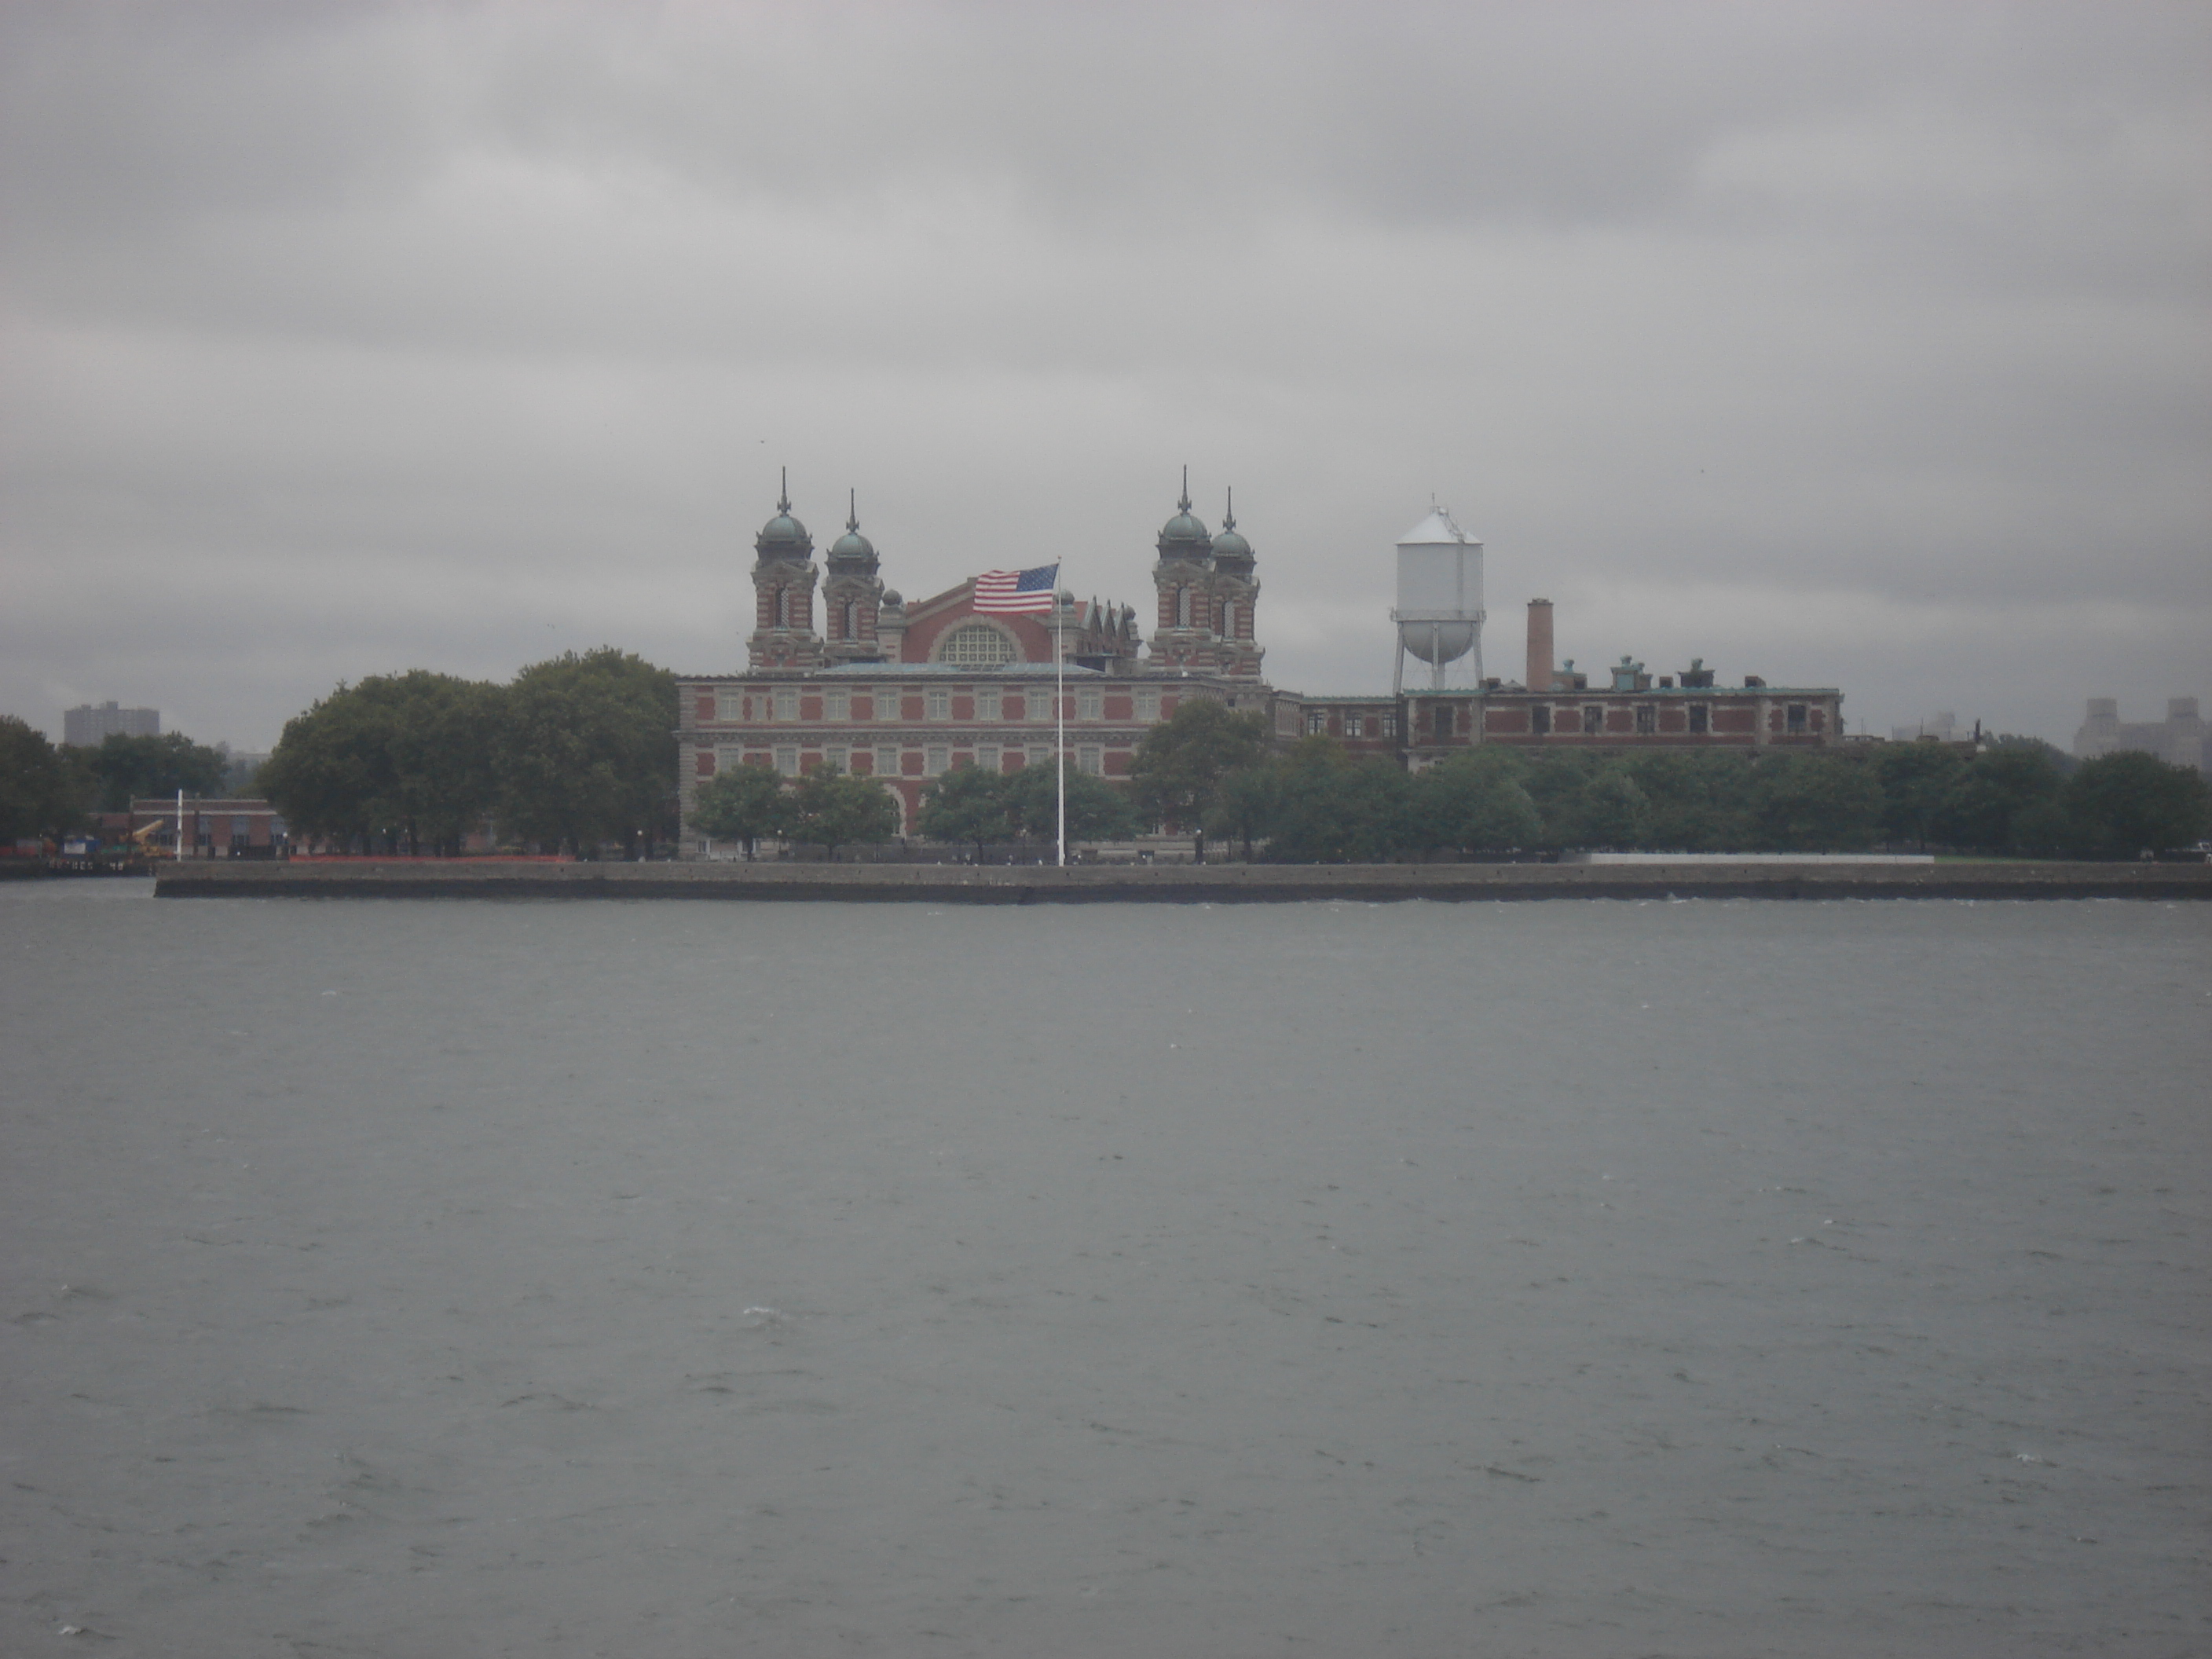 Ellis Island - Where Fred Swanhorst and Erika Russman Swanhorst arrived in America in 1923 and 1925, respectively.